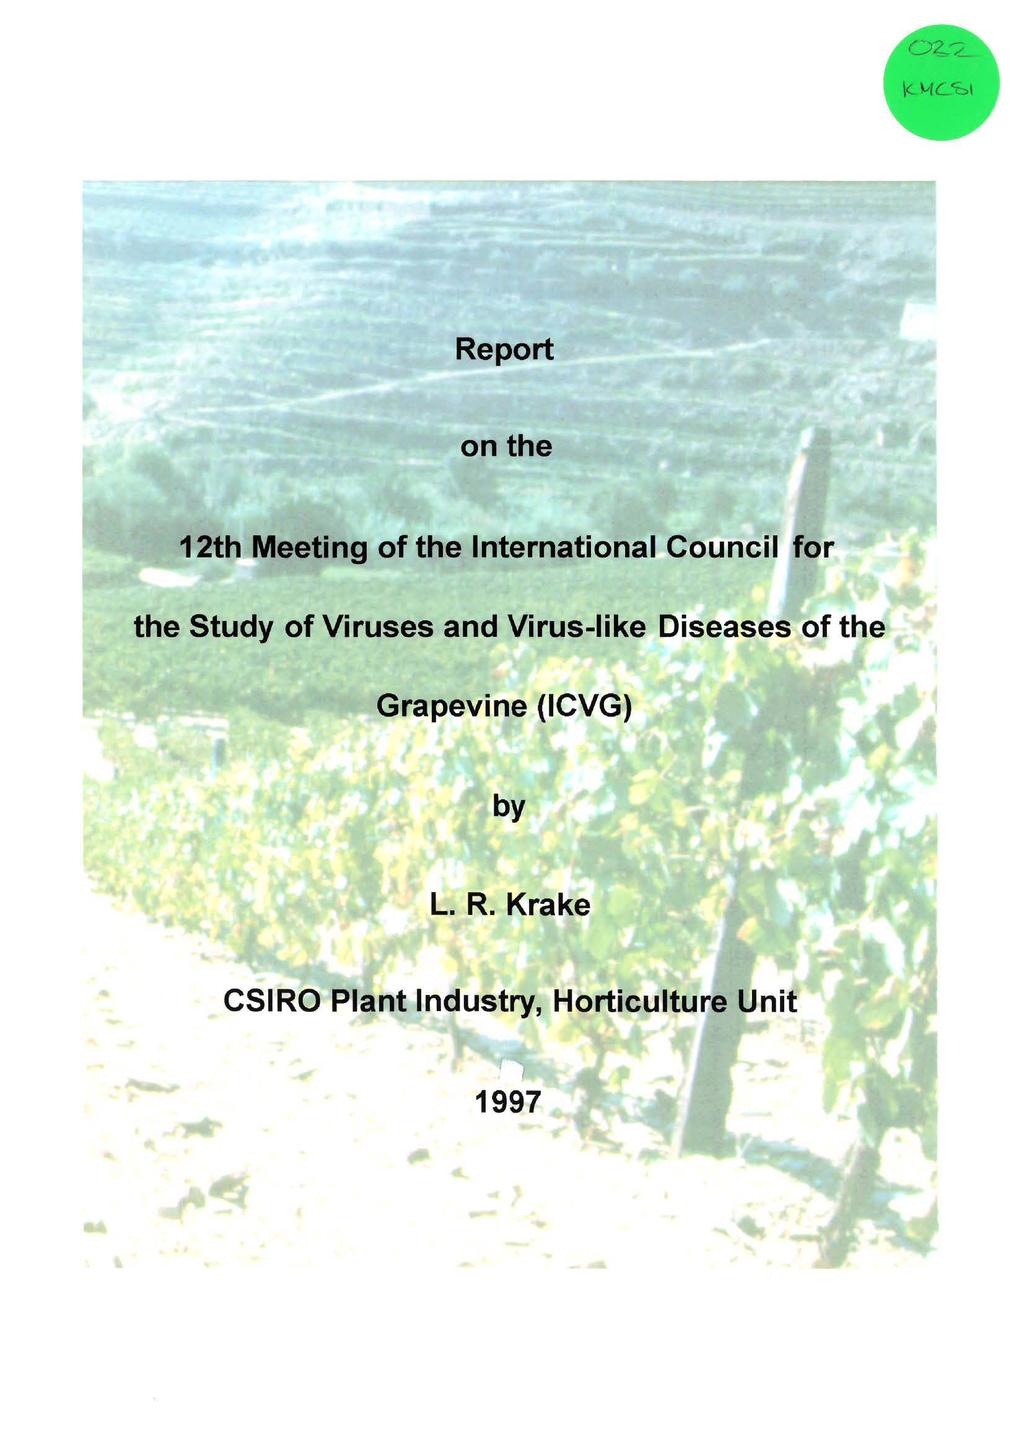 Report on the 12th Meeting of the International Council for the